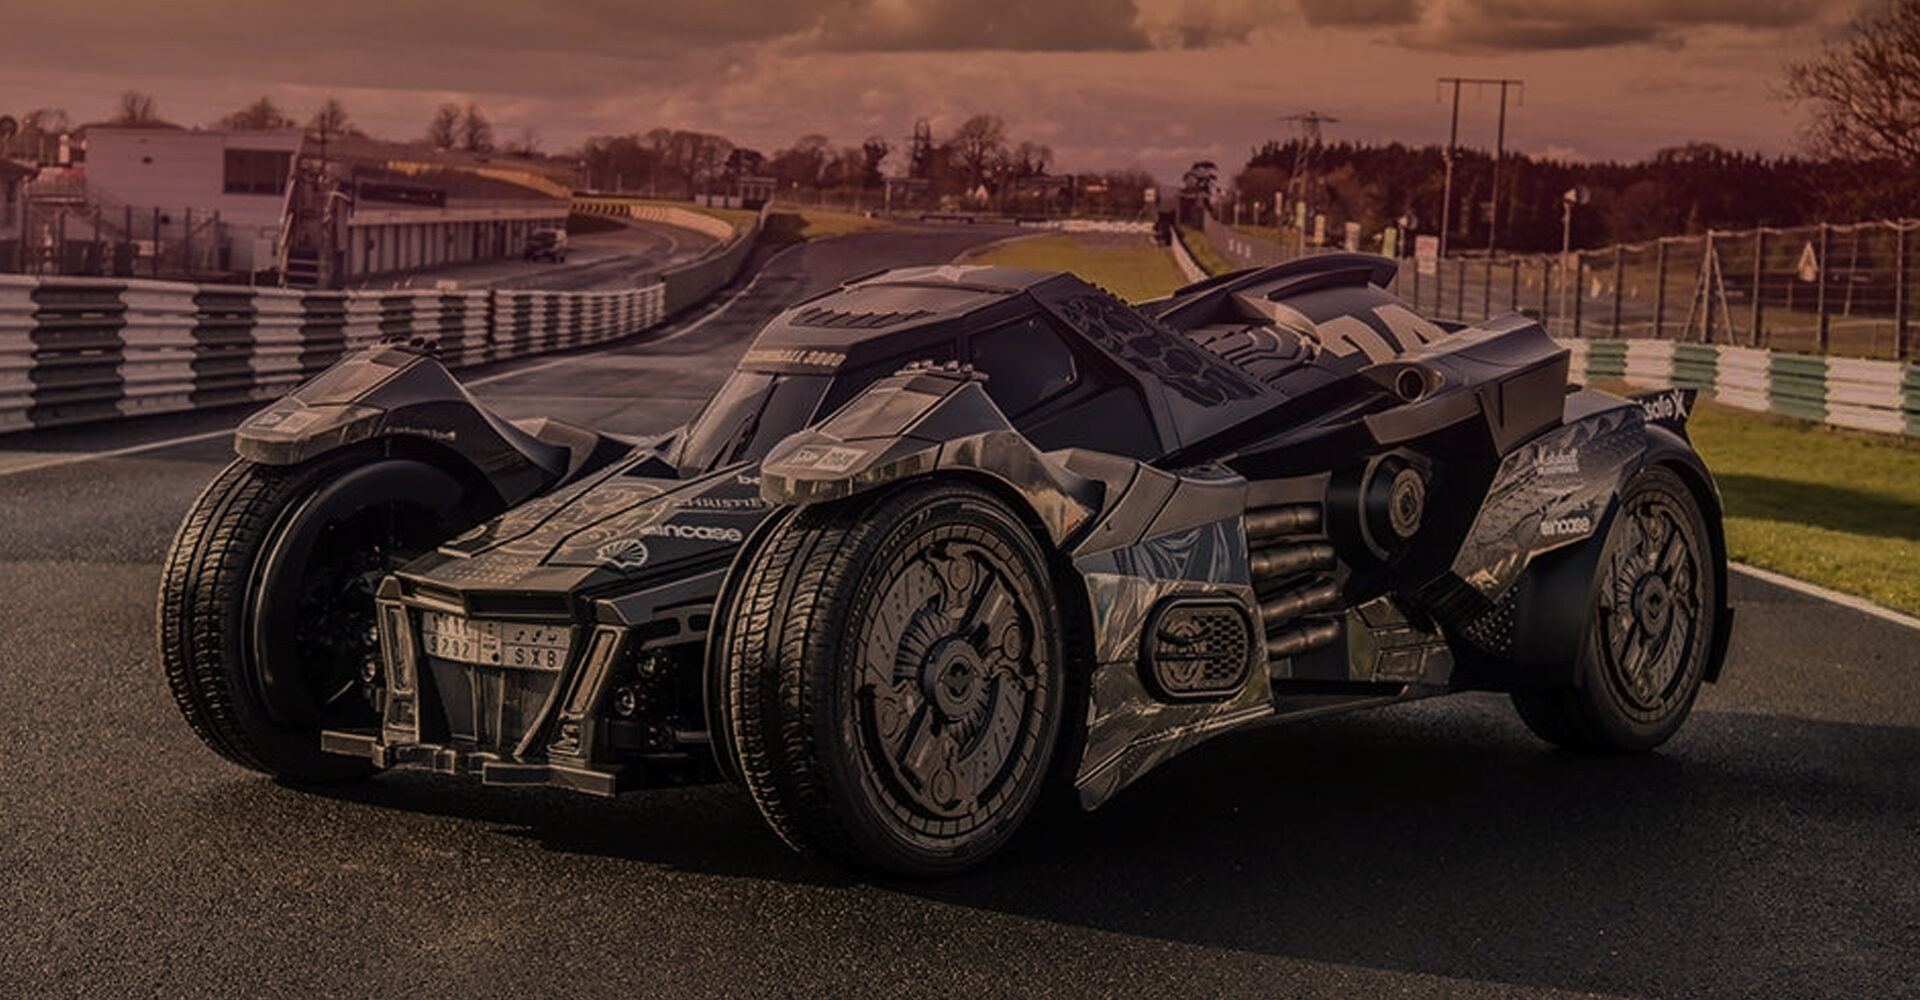 A car which took part at the Gumball 3000 was very similar to the Batmobile